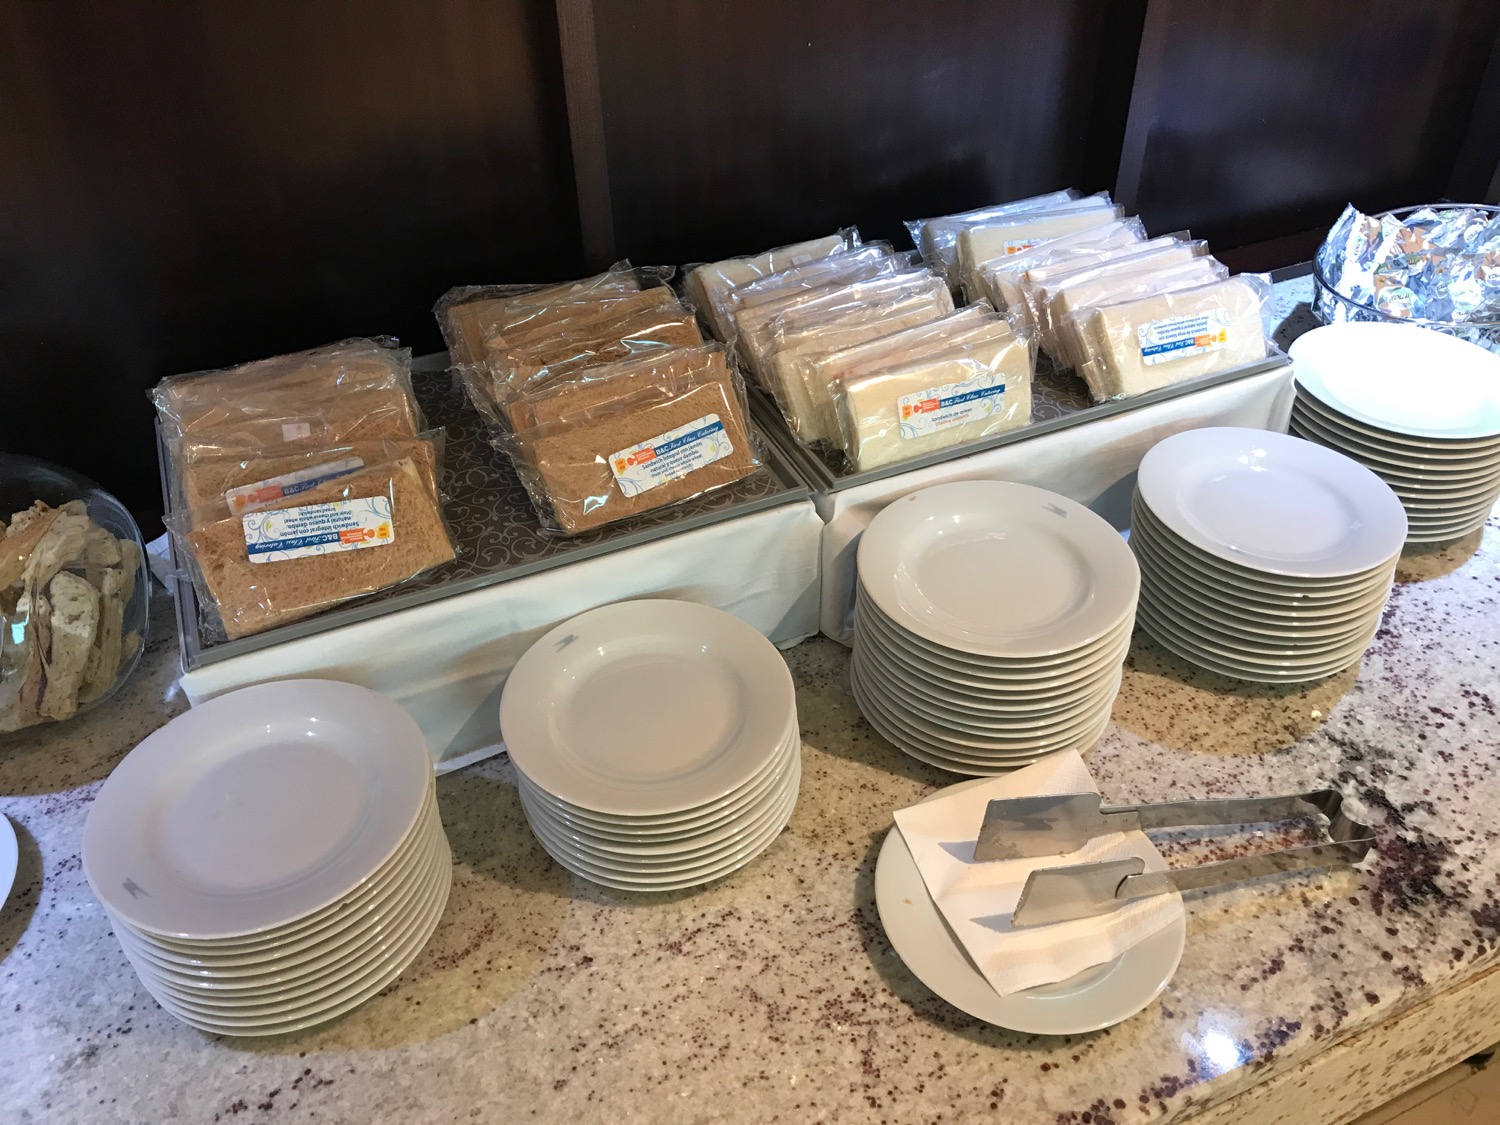 a stack of plates and a tray of food